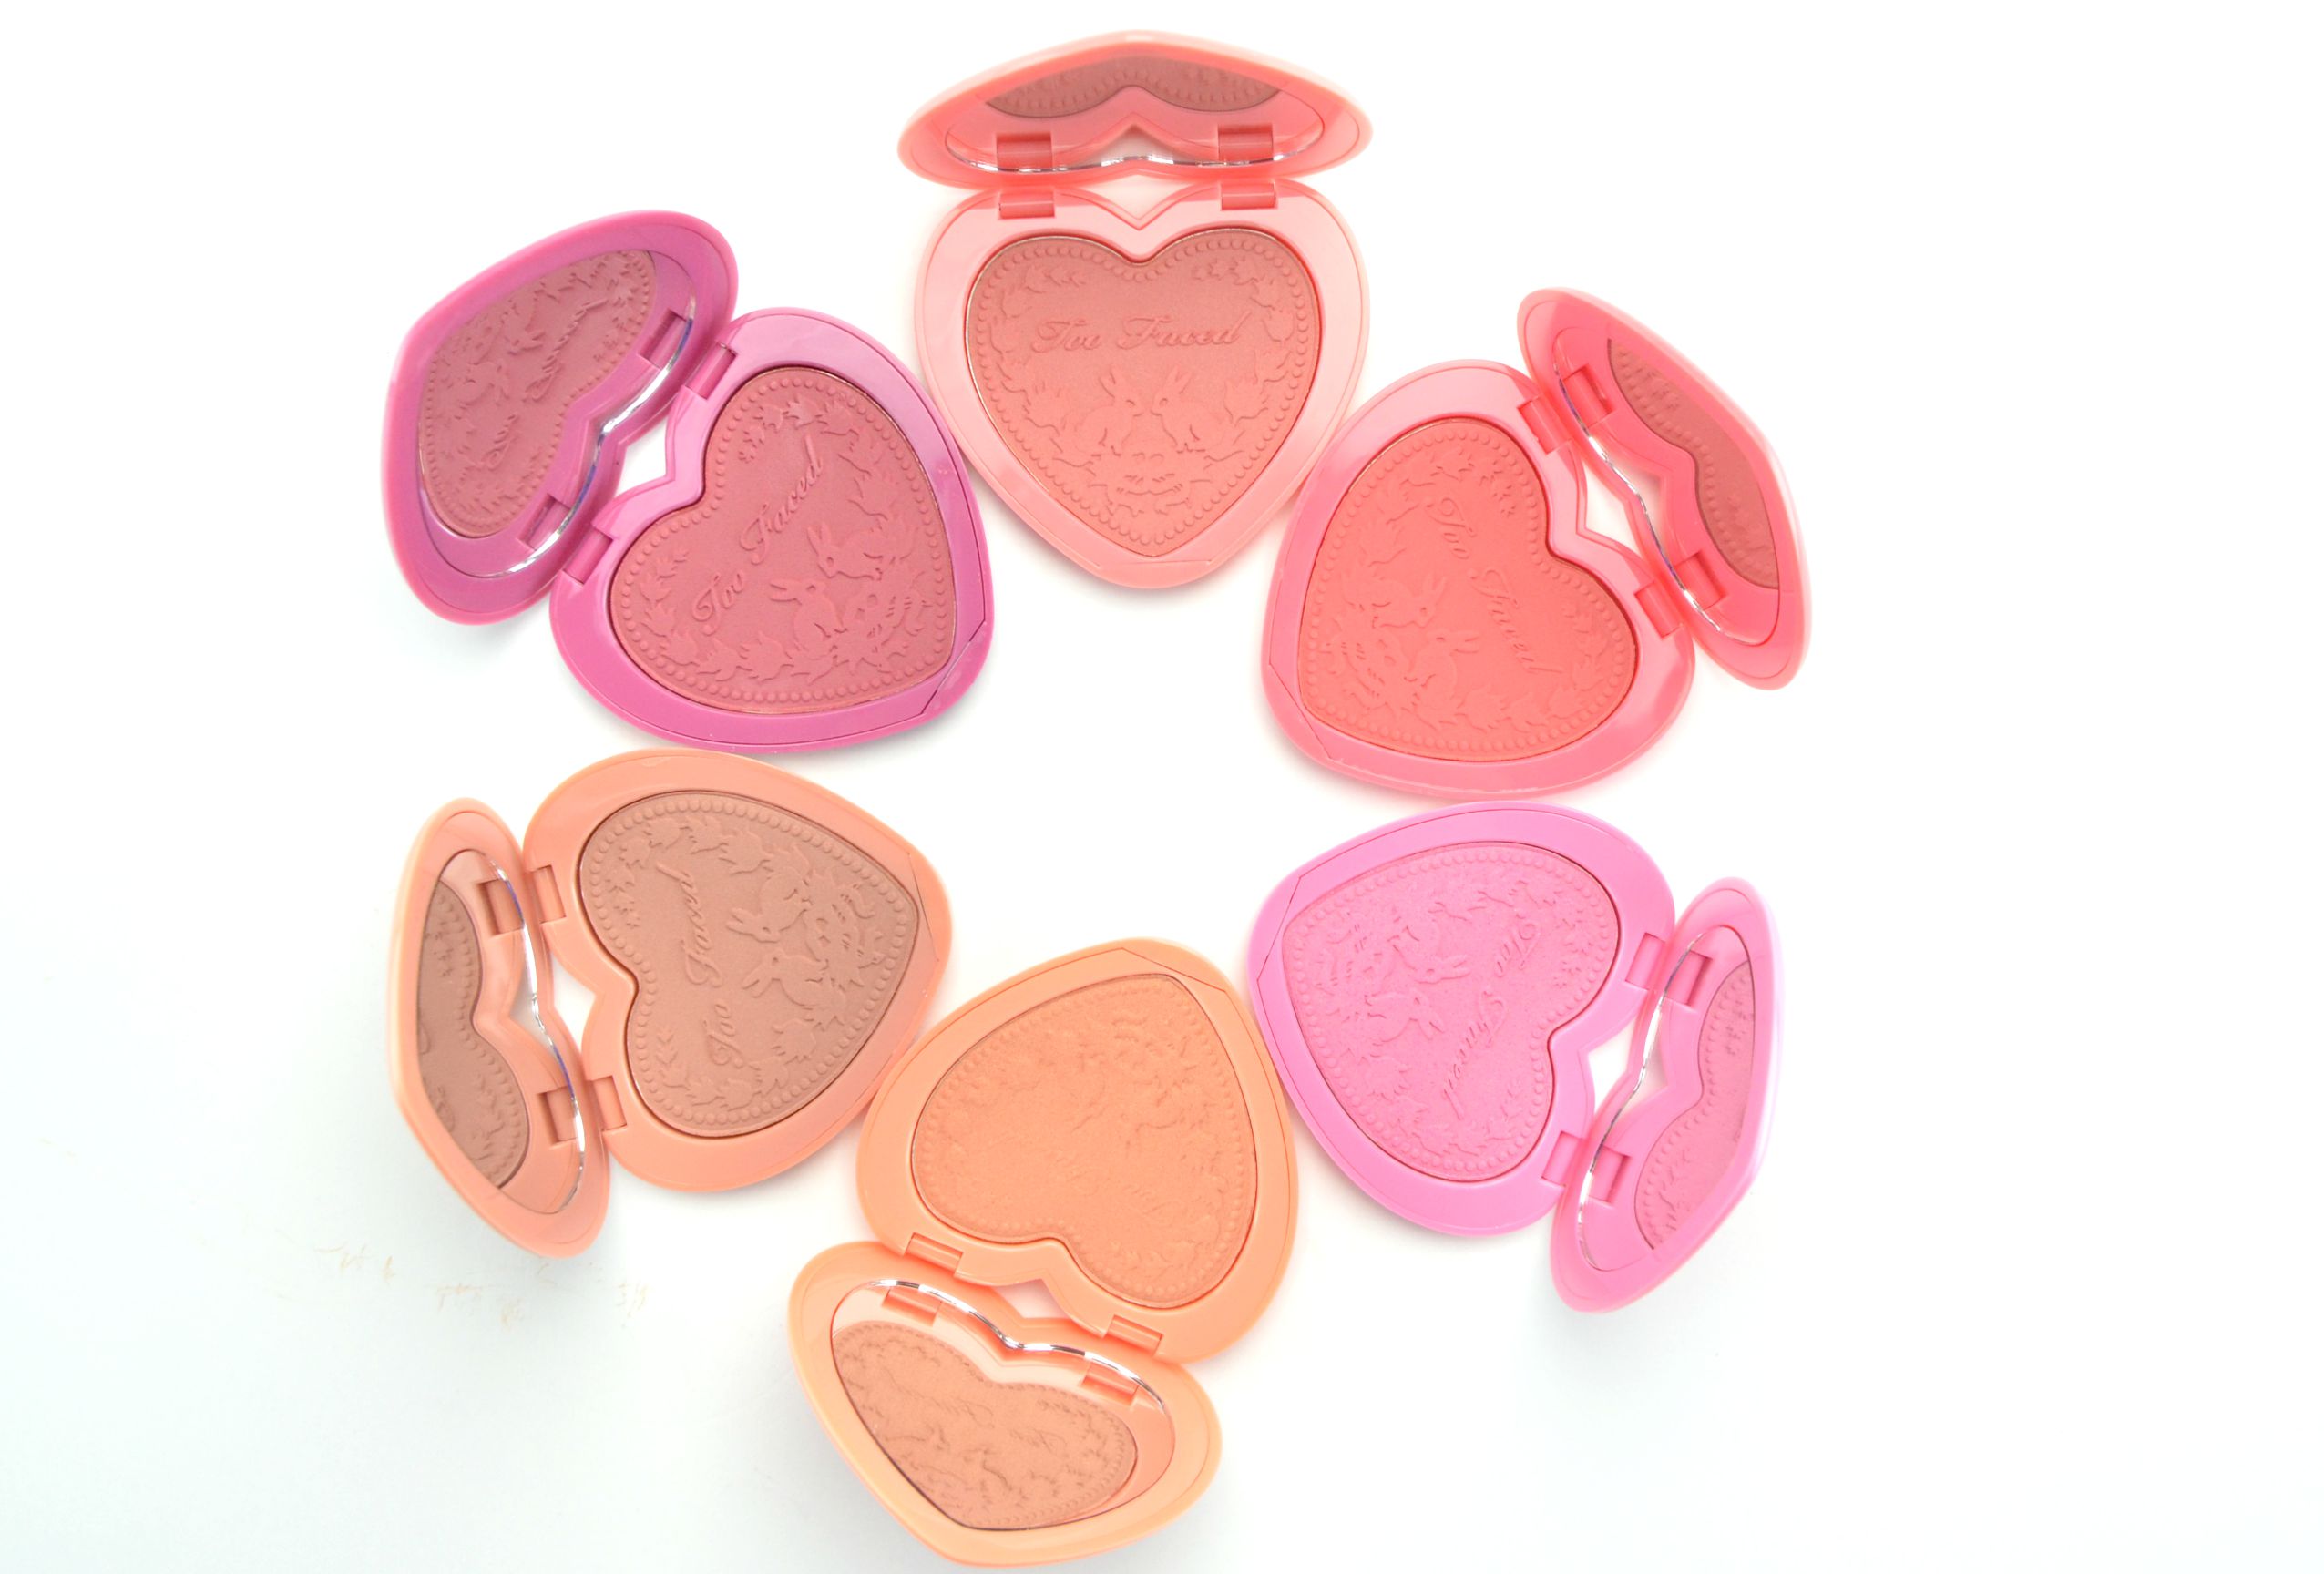 Too Faced Love Flush Long-Lasting Blush Review